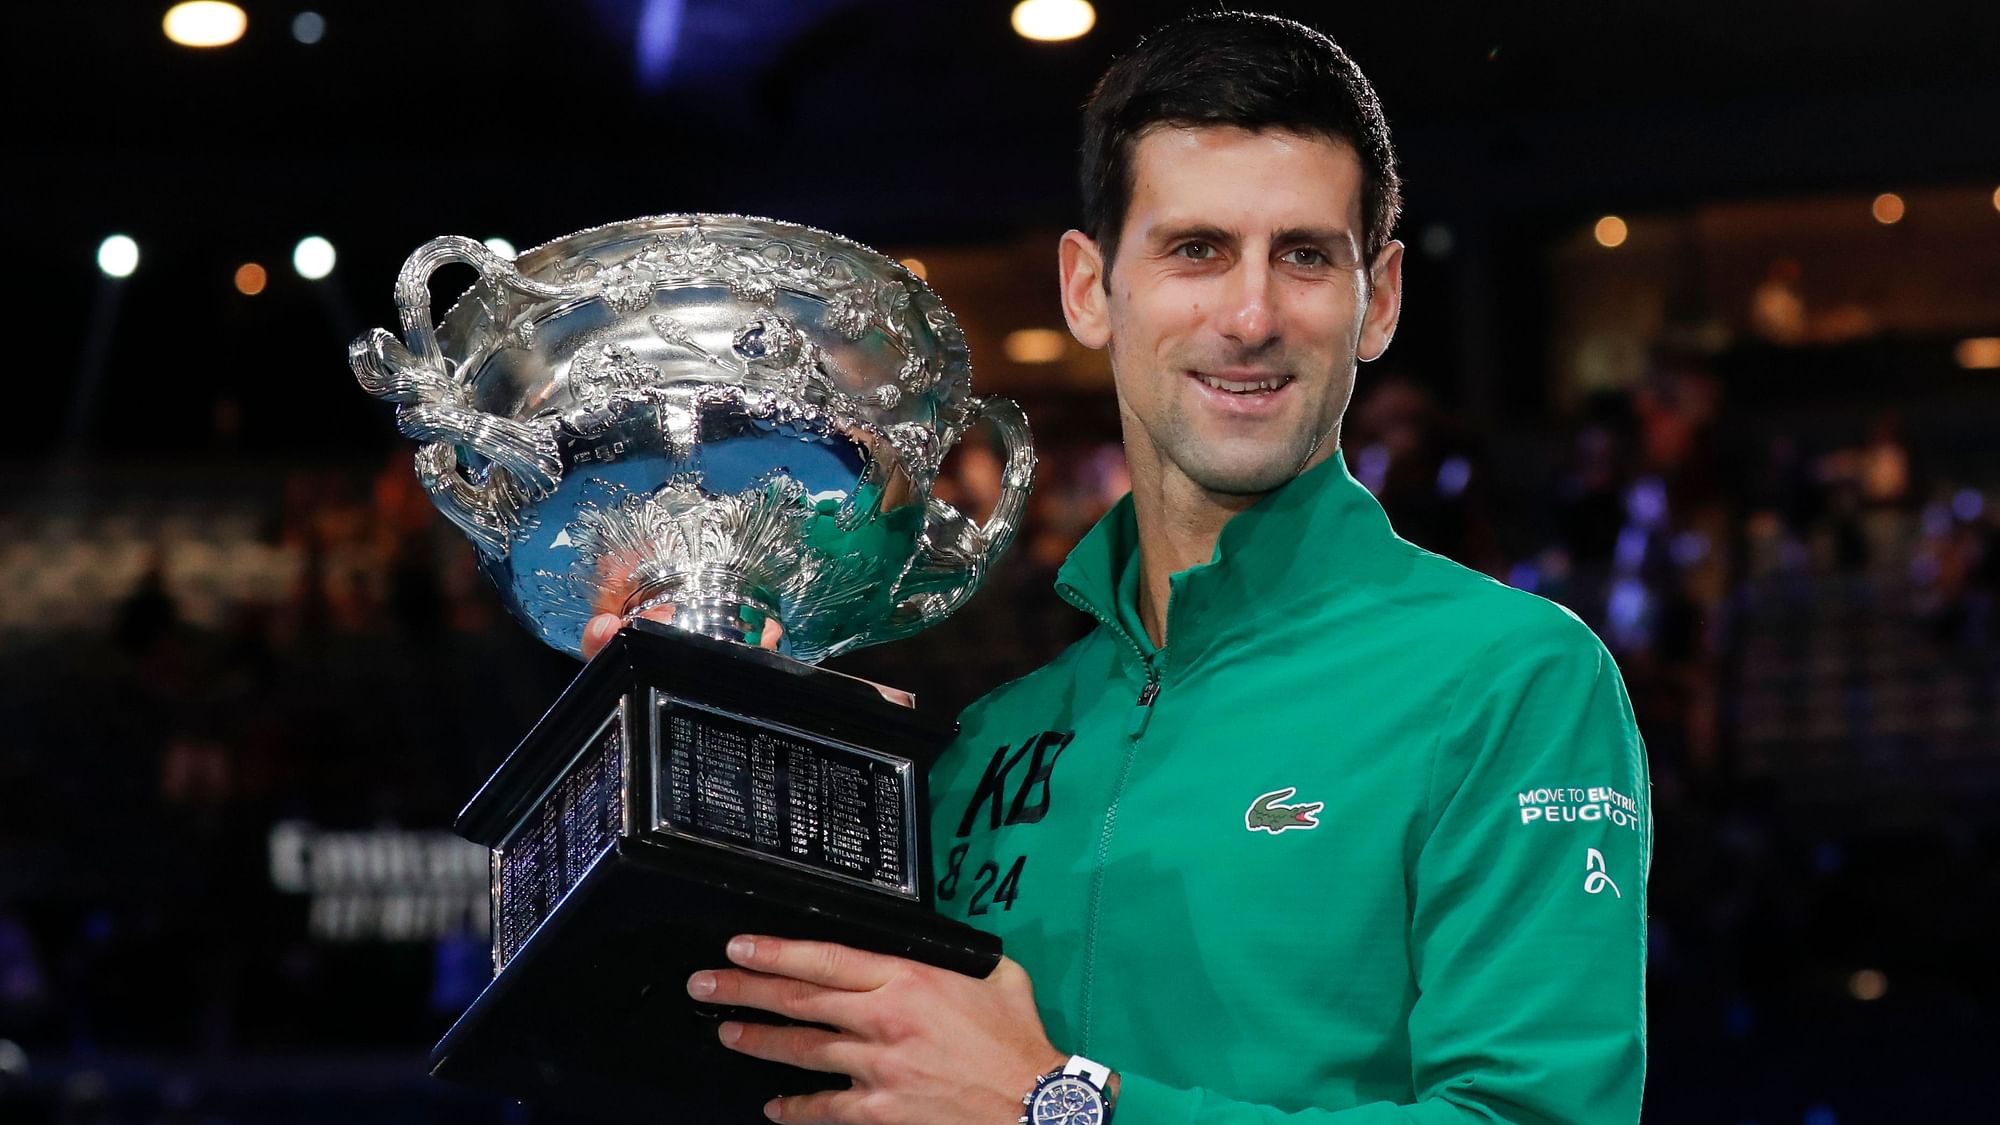 Djokovic is the first male player in the open era to win Grand Slam singles titles in three different decades.